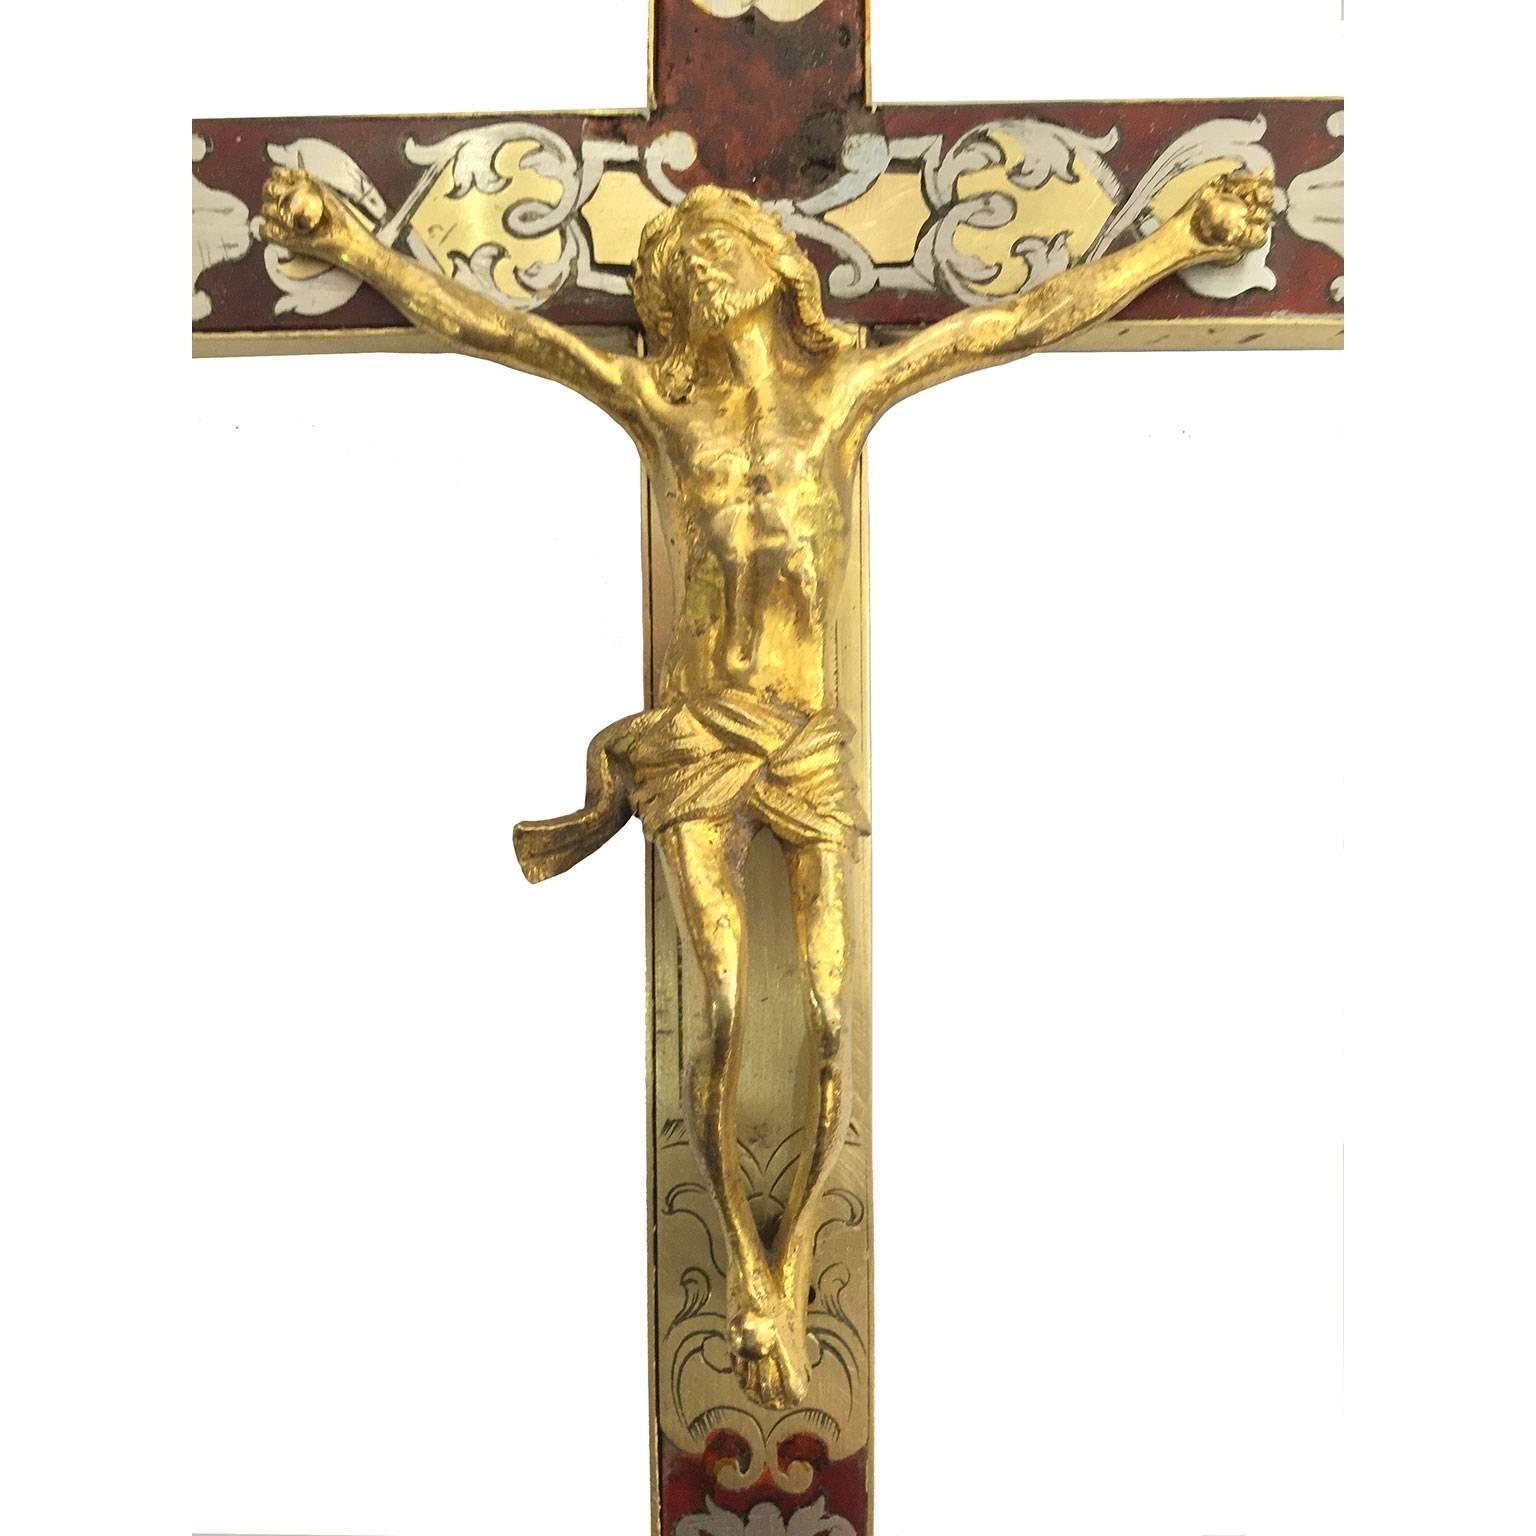 18th century Italian Grand Tour cast gilt bronze crucifix with inlaid tortoiseshell boulle style cross, finely decorated with brass and zinc inlays, a memento skull at the base and INRI plate placed on the cross top. The workmanship of this Italian